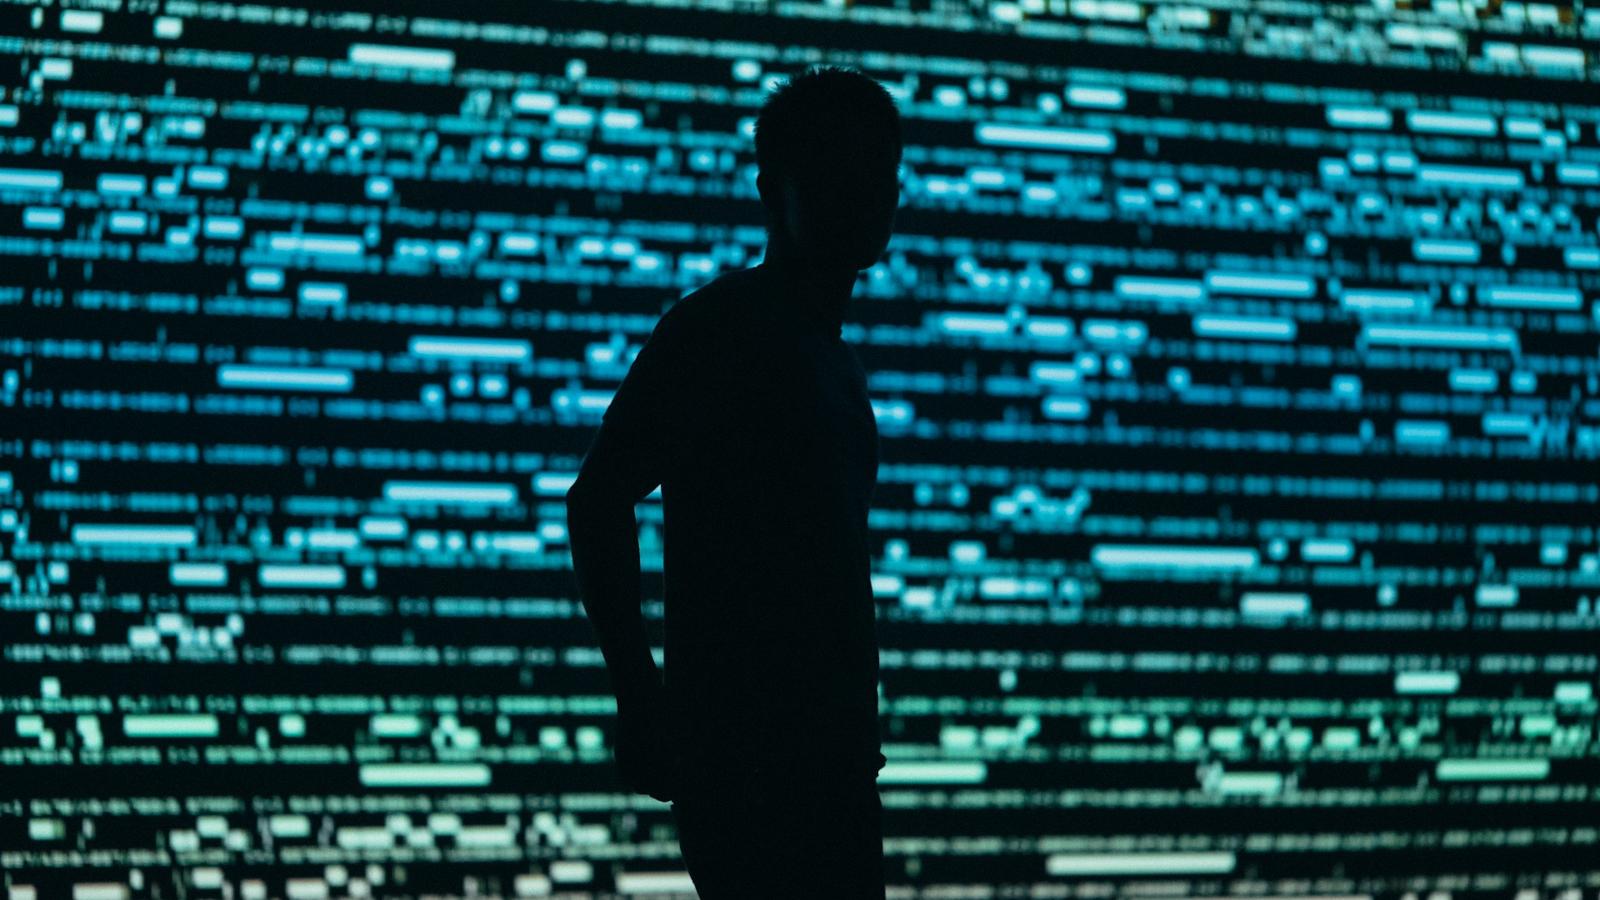 Surveillance, illustrated by the silhouette of a man in front of a data wall